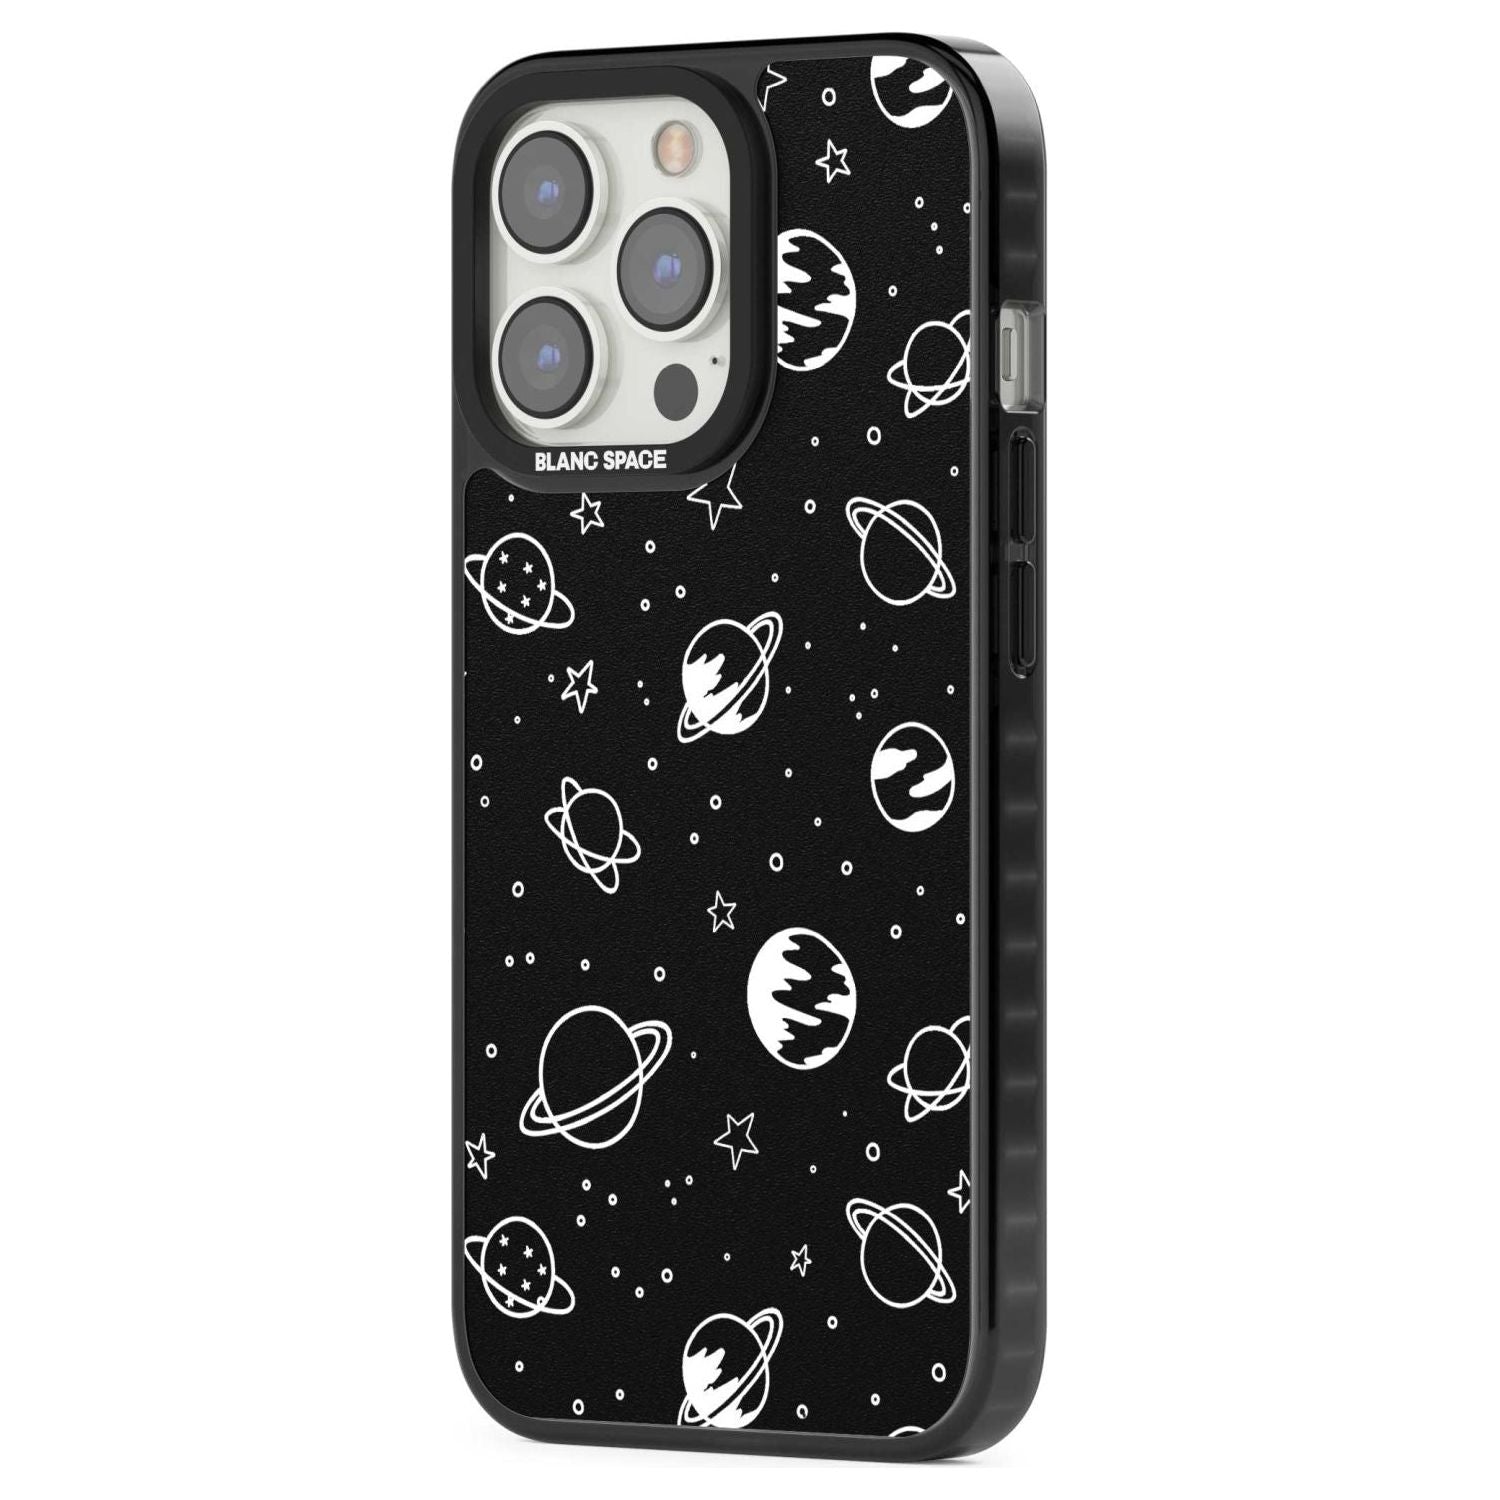 Cosmic Outer Space Design White on Black Phone Case iPhone 15 Pro Max / Black Impact Case,iPhone 15 Plus / Black Impact Case,iPhone 15 Pro / Black Impact Case,iPhone 15 / Black Impact Case,iPhone 15 Pro Max / Impact Case,iPhone 15 Plus / Impact Case,iPhone 15 Pro / Impact Case,iPhone 15 / Impact Case,iPhone 15 Pro Max / Magsafe Black Impact Case,iPhone 15 Plus / Magsafe Black Impact Case,iPhone 15 Pro / Magsafe Black Impact Case,iPhone 15 / Magsafe Black Impact Case,iPhone 14 Pro Max / Black Impact Case,iPh